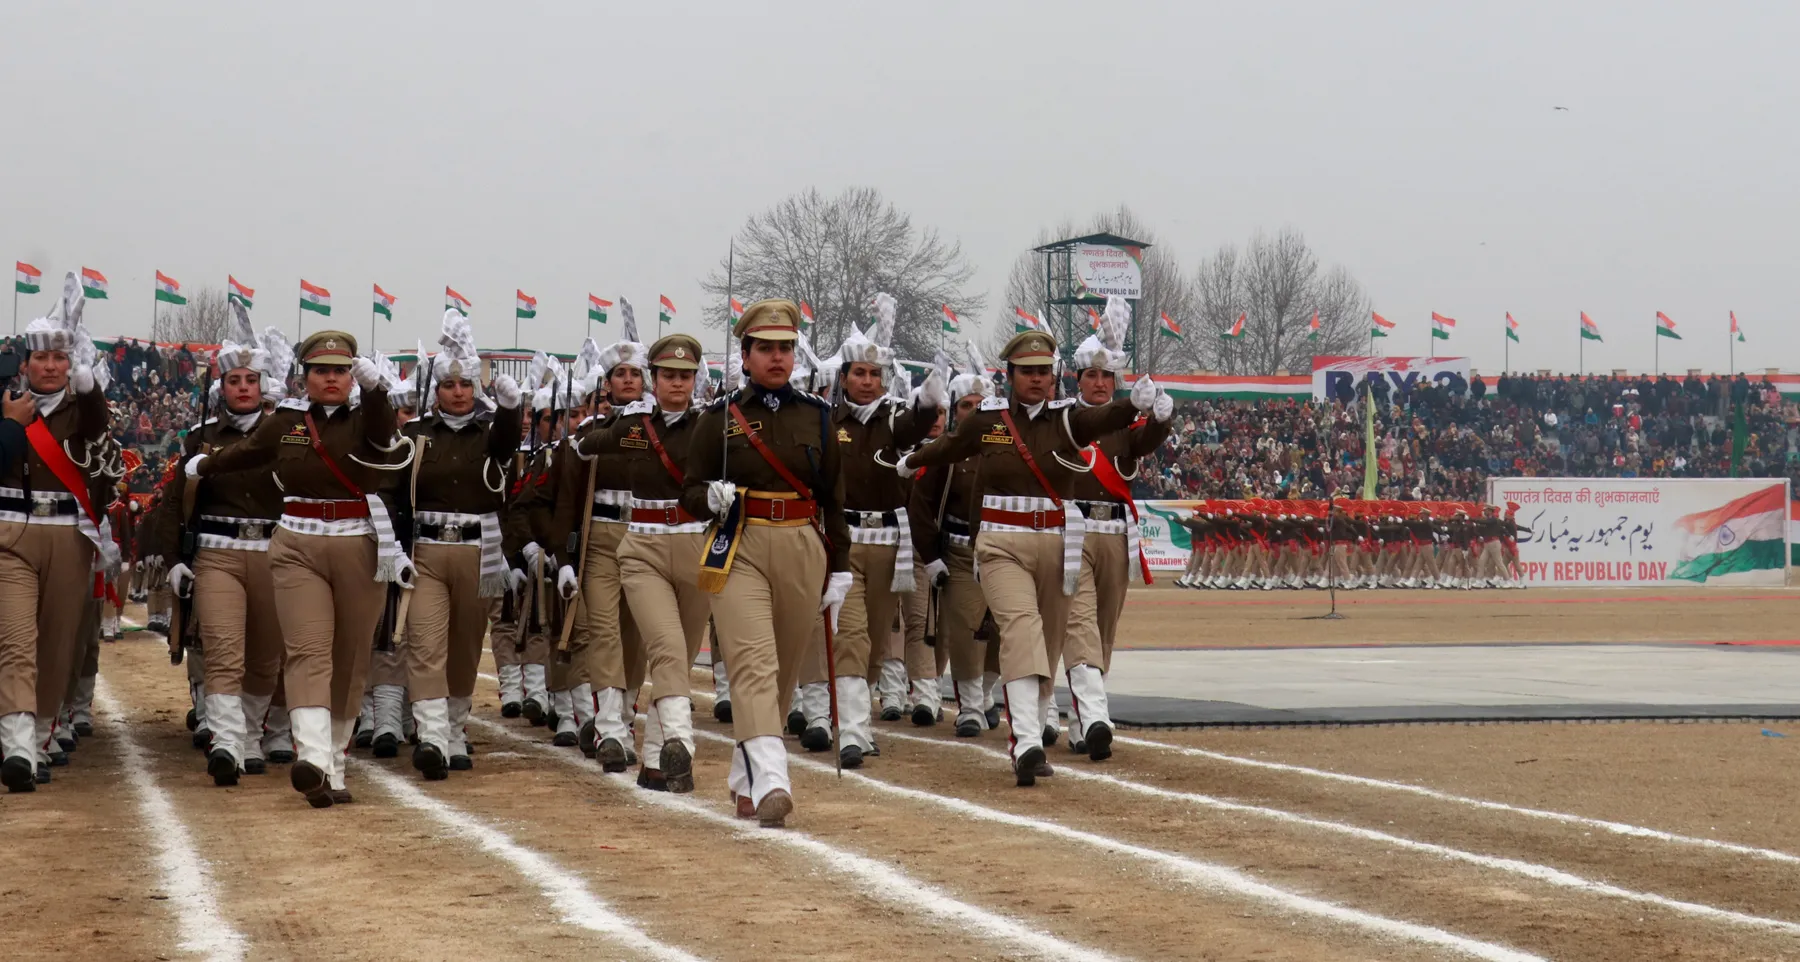 A woman contingent of J&K Police performs during the Republic Day function at Bakshi stadium in Srinagar on Friday. Mubashir Khan for Greater Kashmir